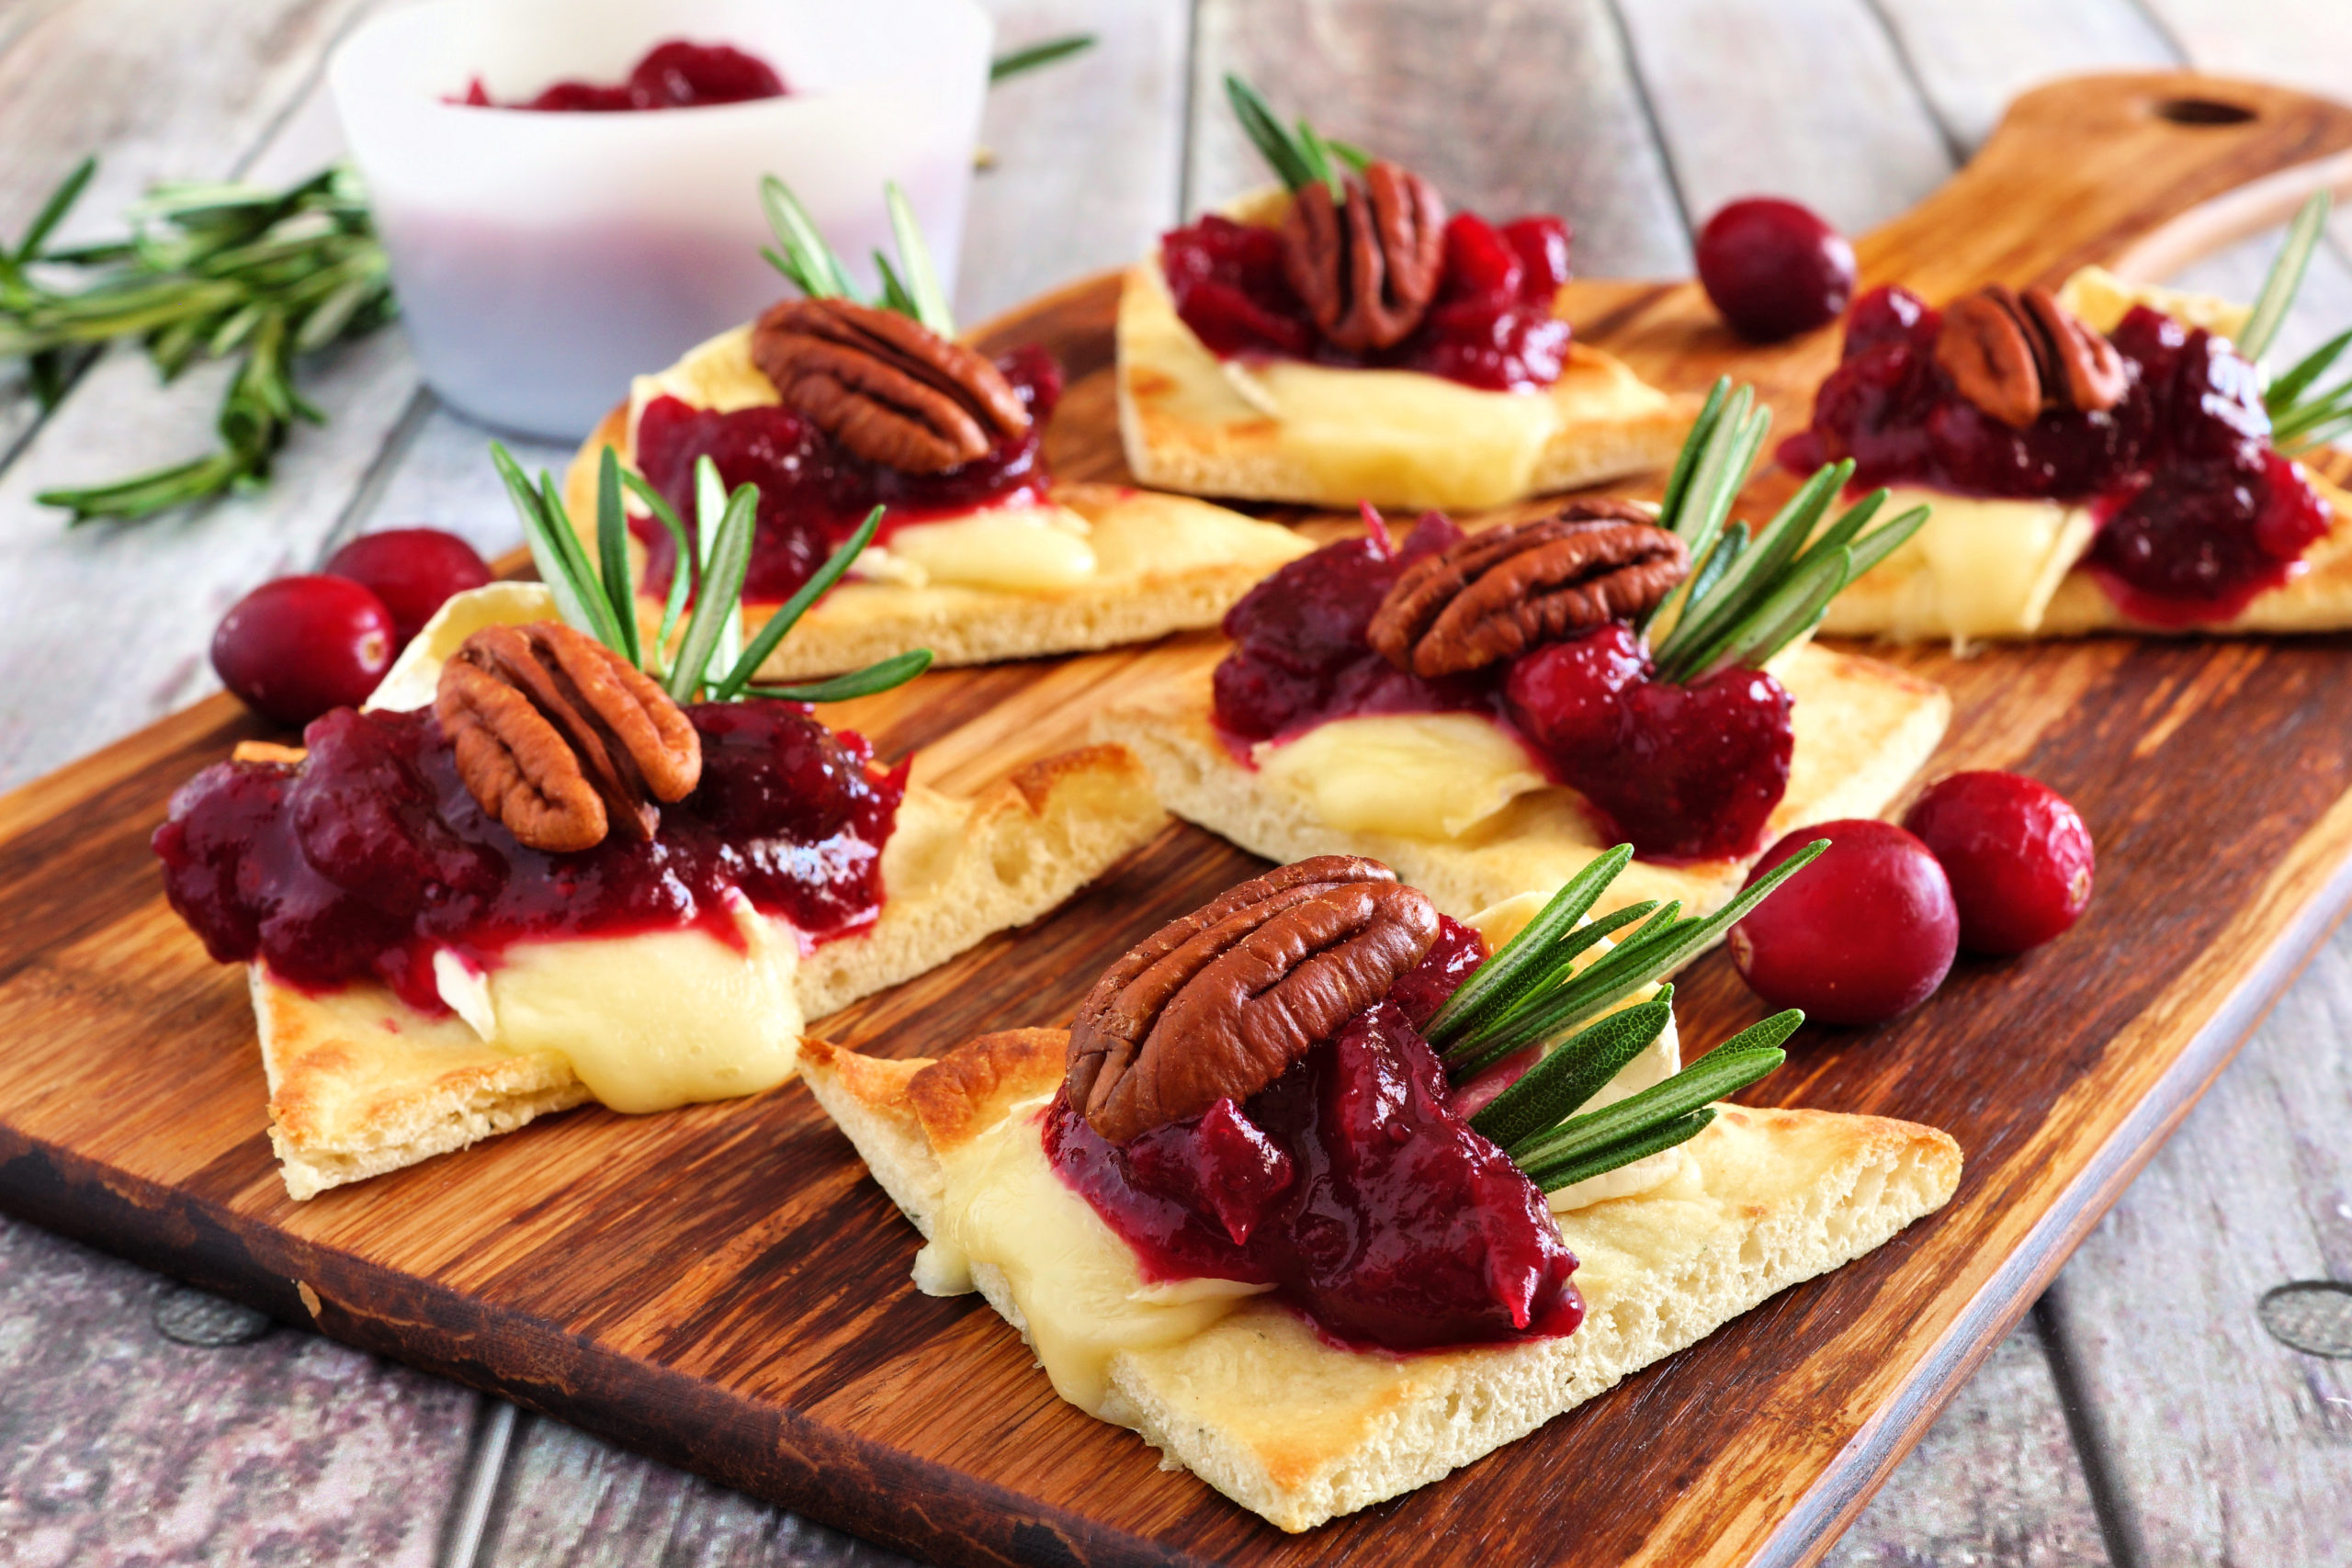 Flatbread Appetizer With Brie Cheese & Cranberries